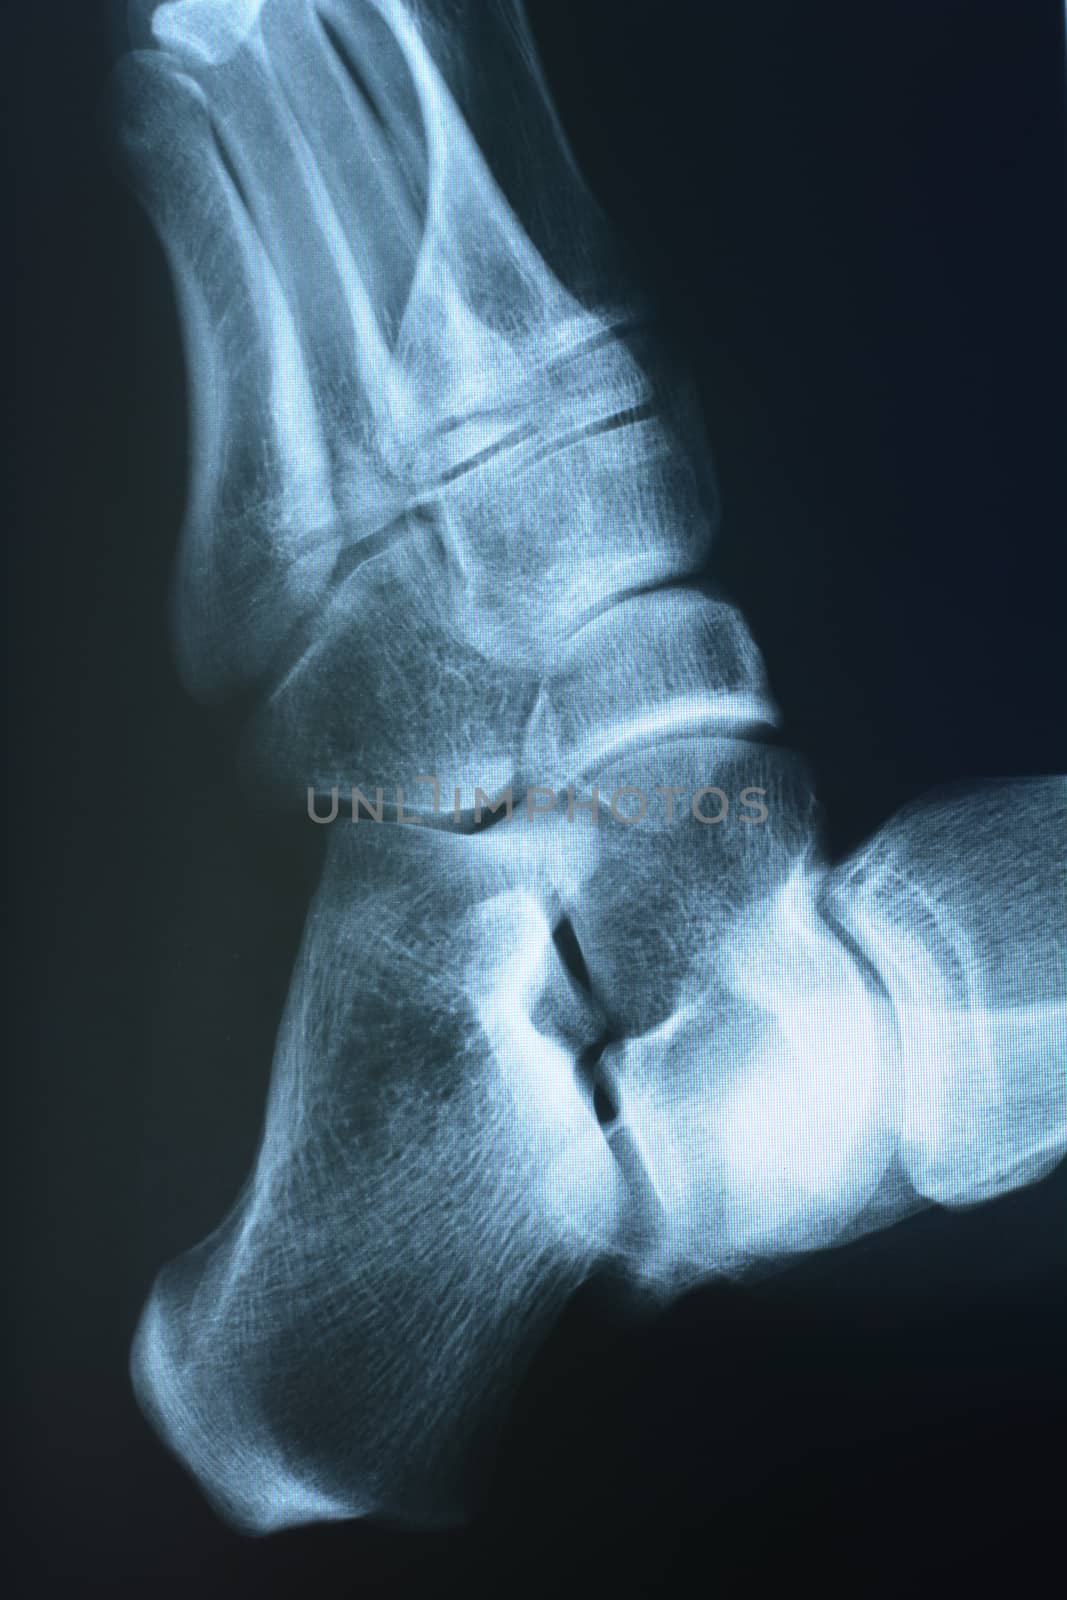 Foot xray by photosampler